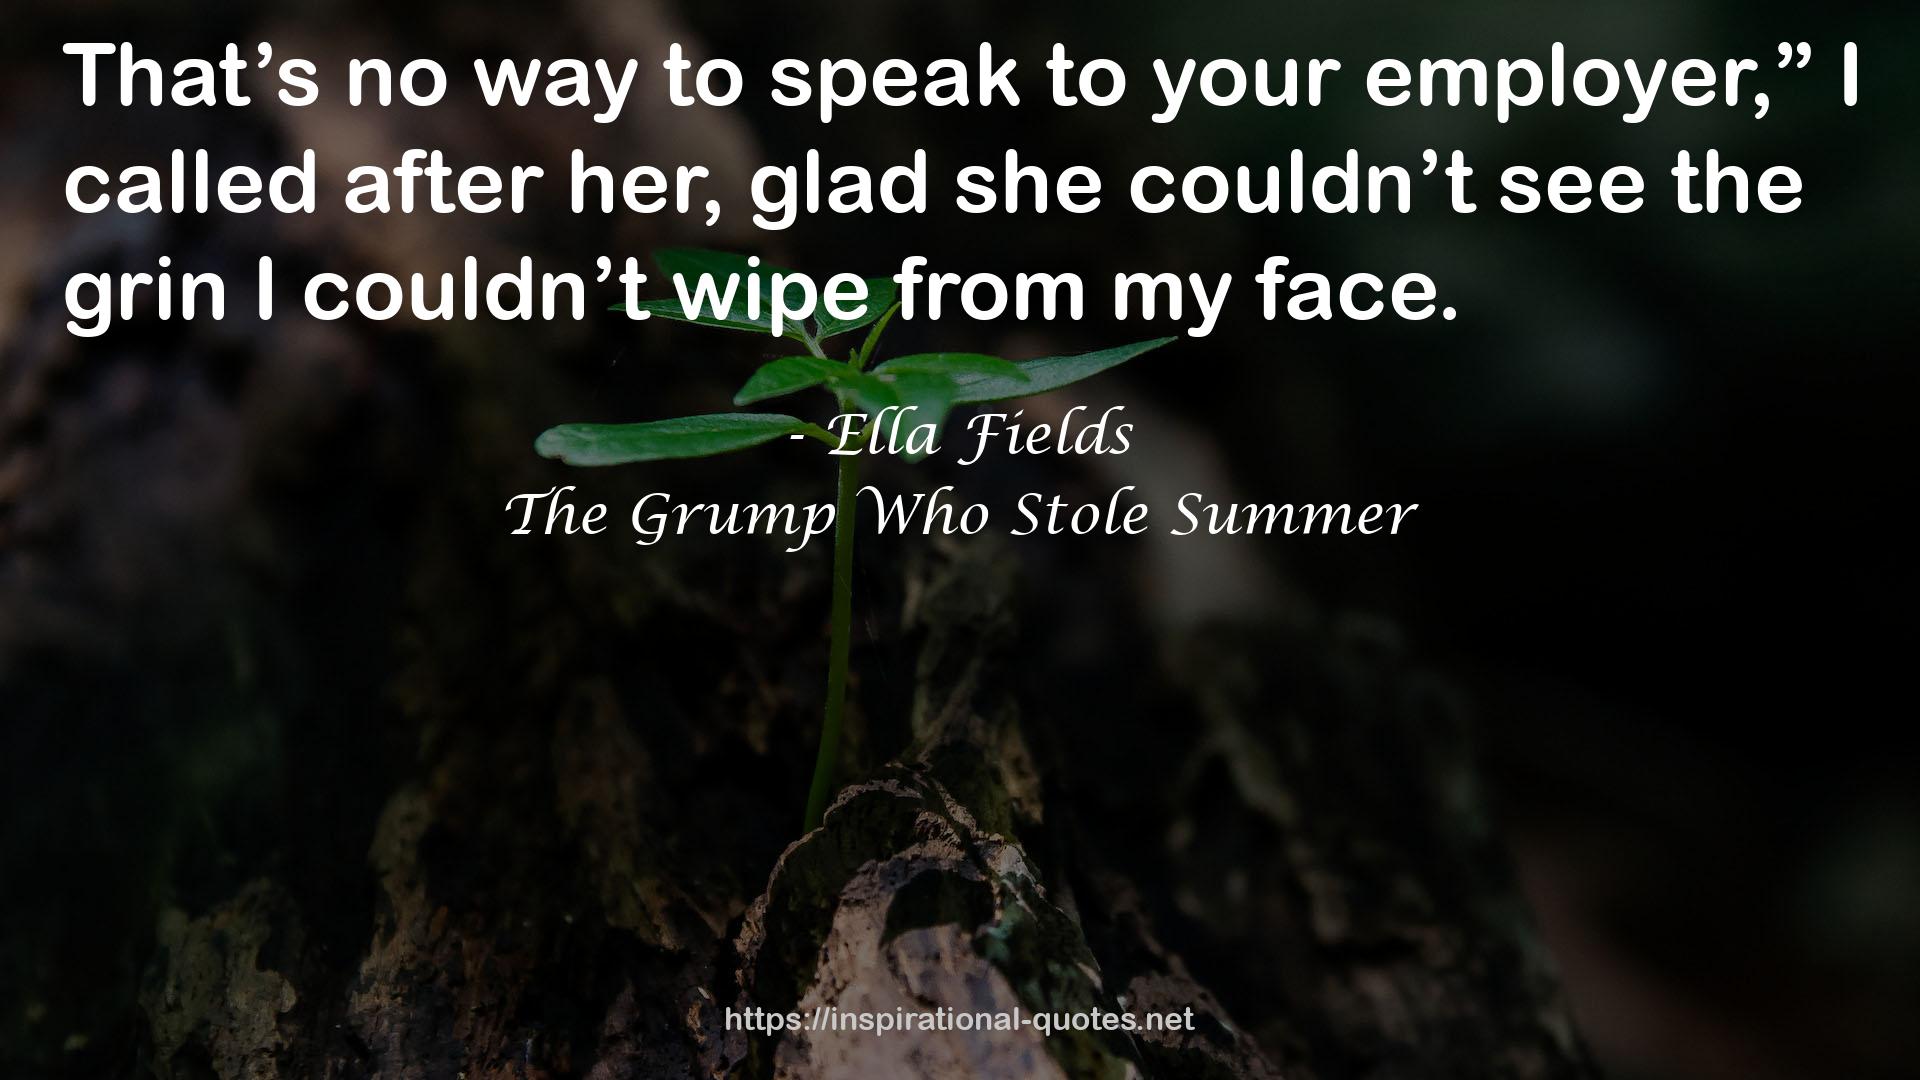 The Grump Who Stole Summer QUOTES